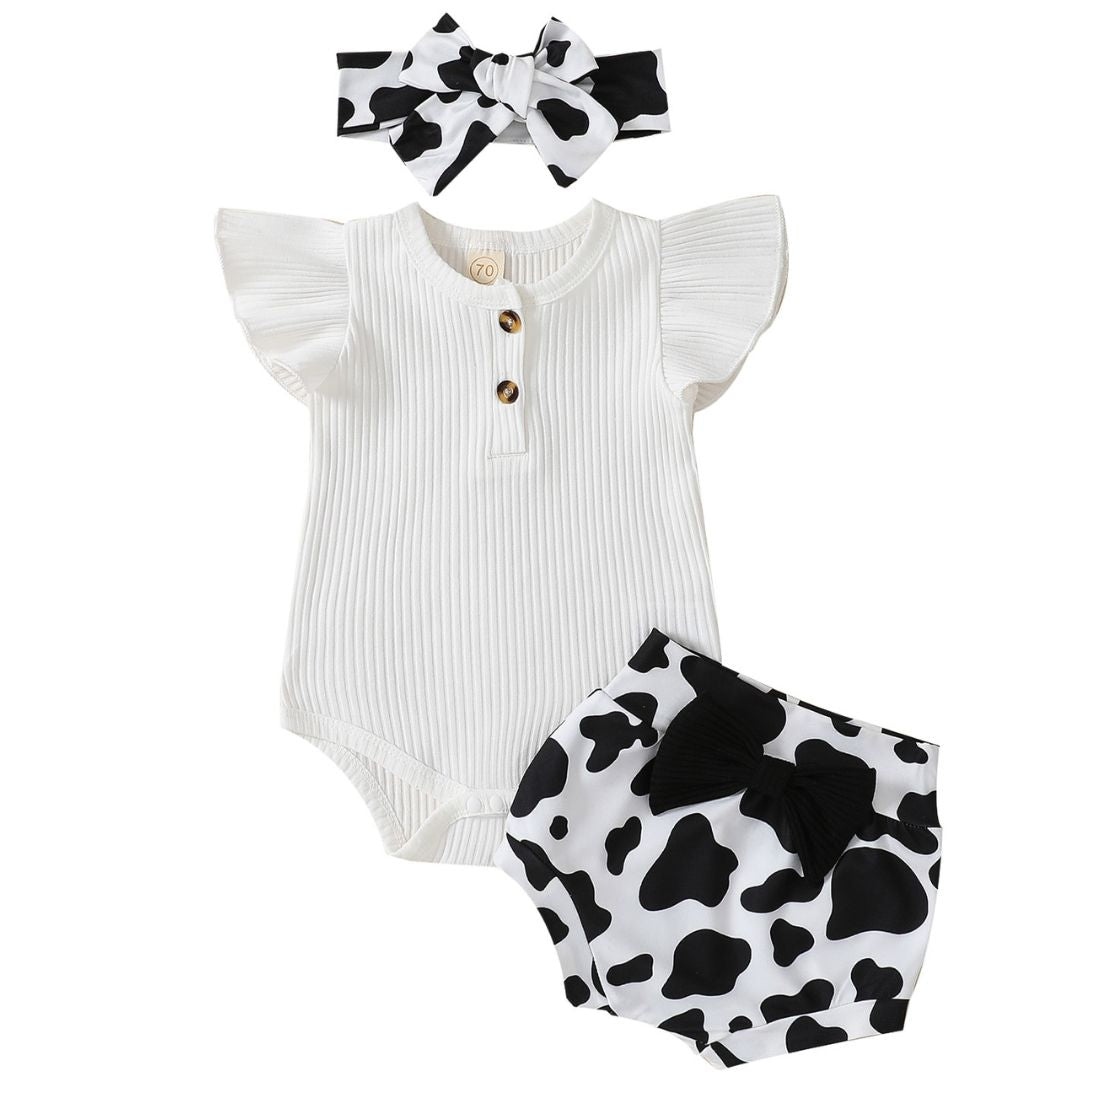 Baby Girl White Fly Sleeve Bodysuit with easy snaps and White/black pattern shorts with Bow Stylish Clothing Set